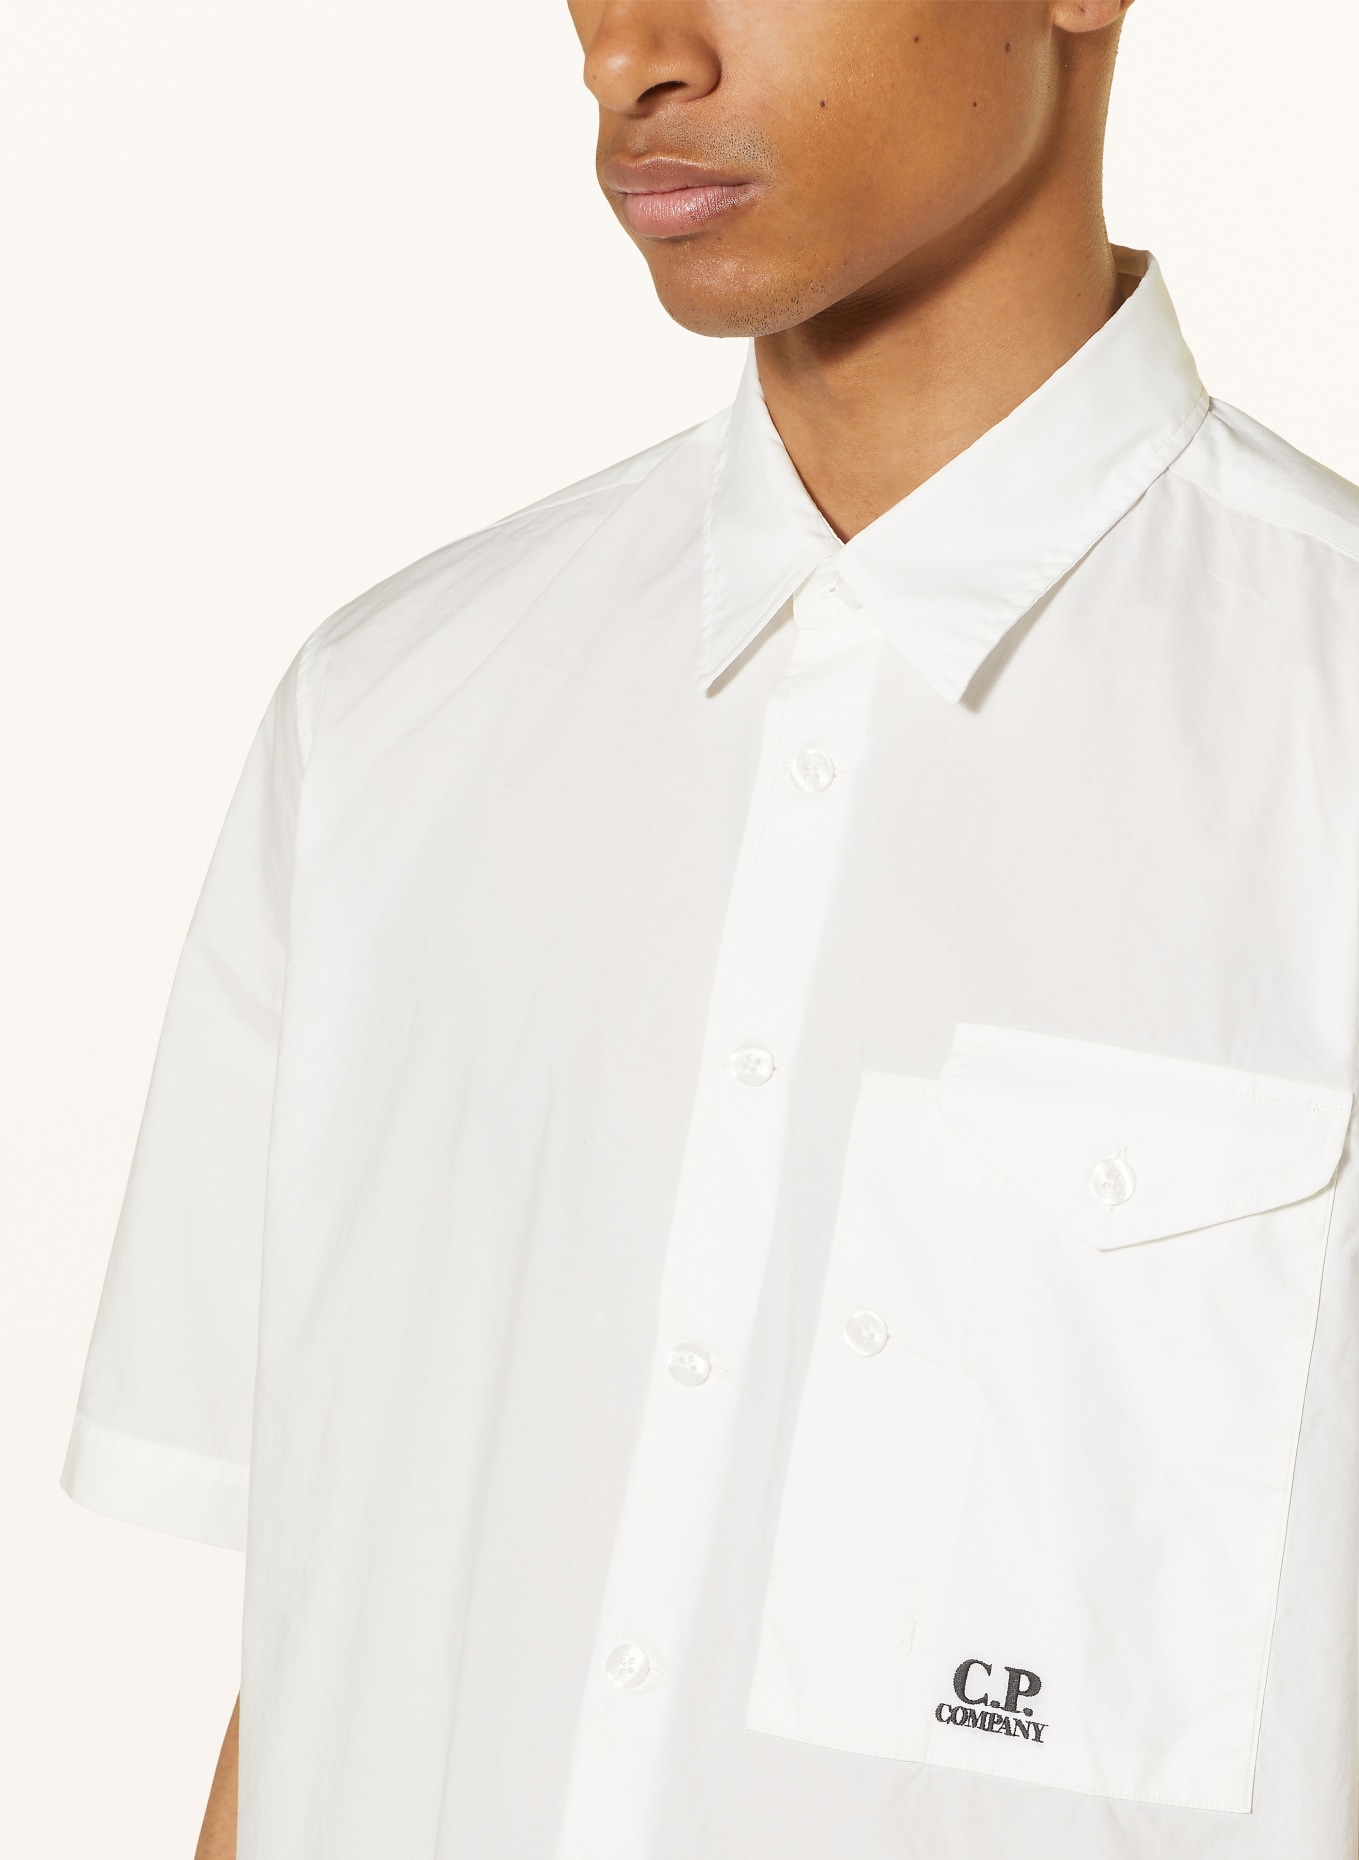 C.P. COMPANY Short sleeve shirt comfort fit, Color: WHITE (Image 4)